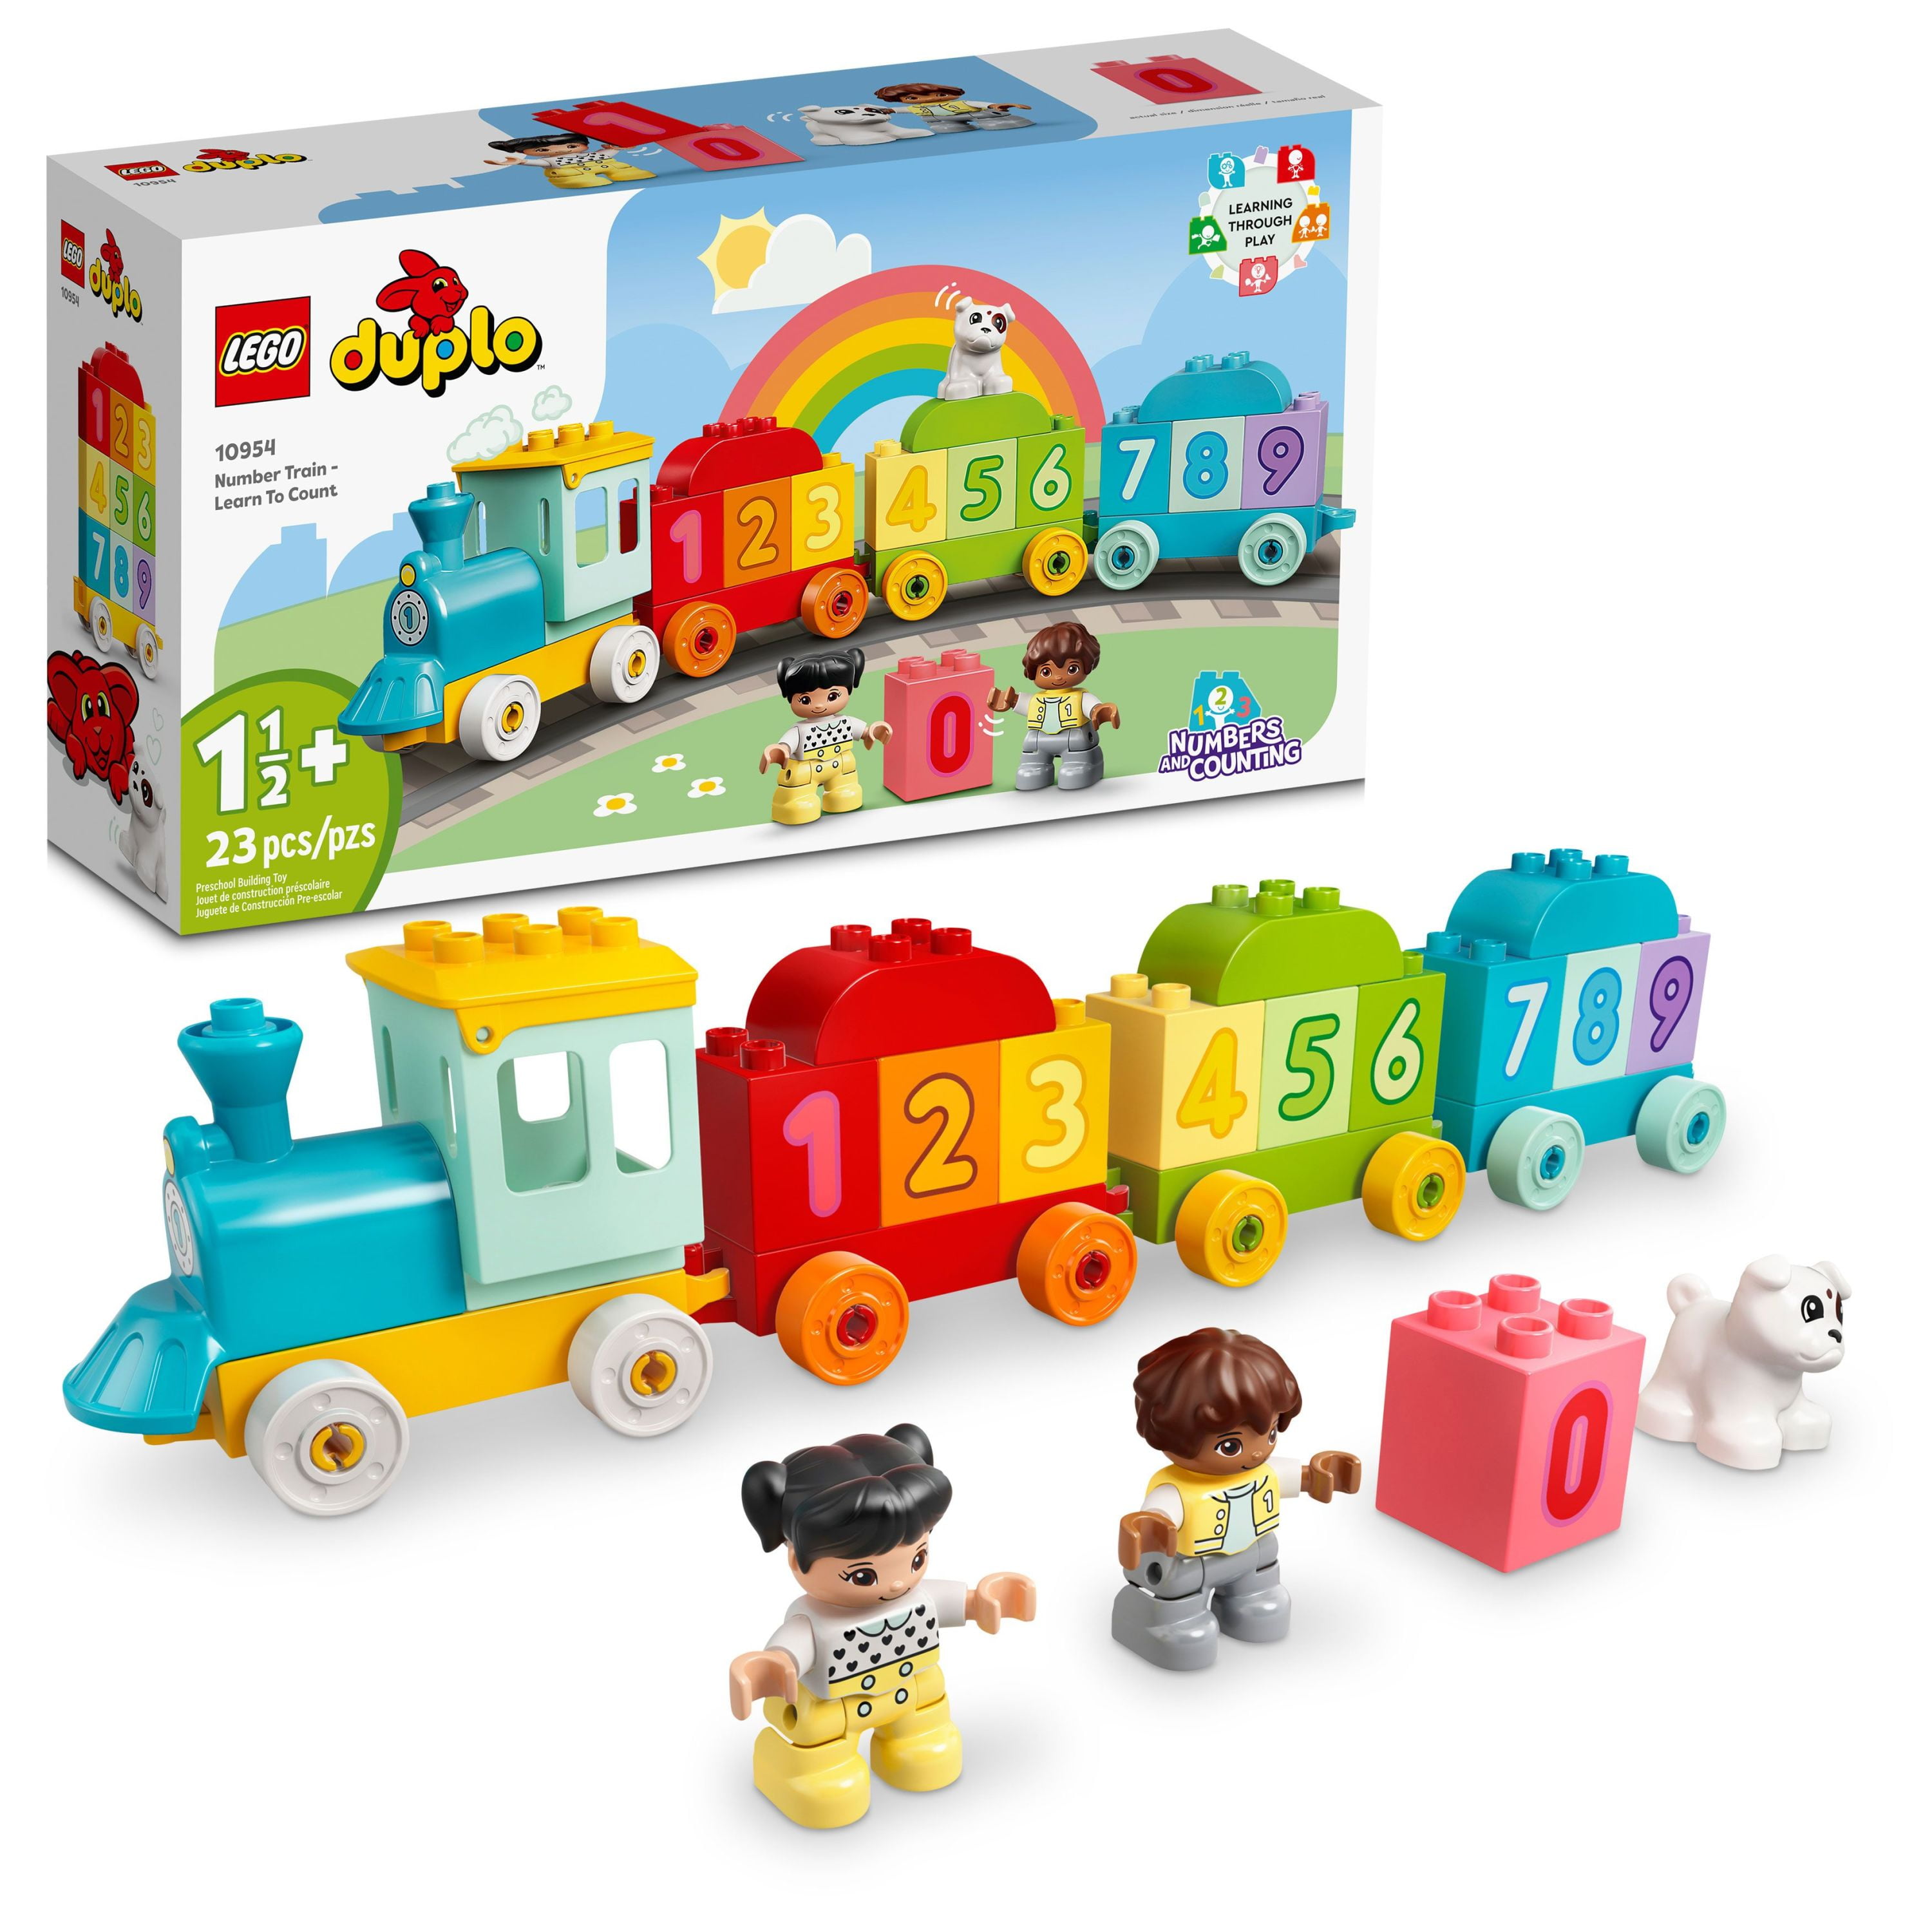 LEGO DUPLO Parking Garage and Car Wash 10948 a Kids' Building Toy for year old Boys and Girls and up, Featuring a Car Wash, Gas Station and Car Park; New 2021 (